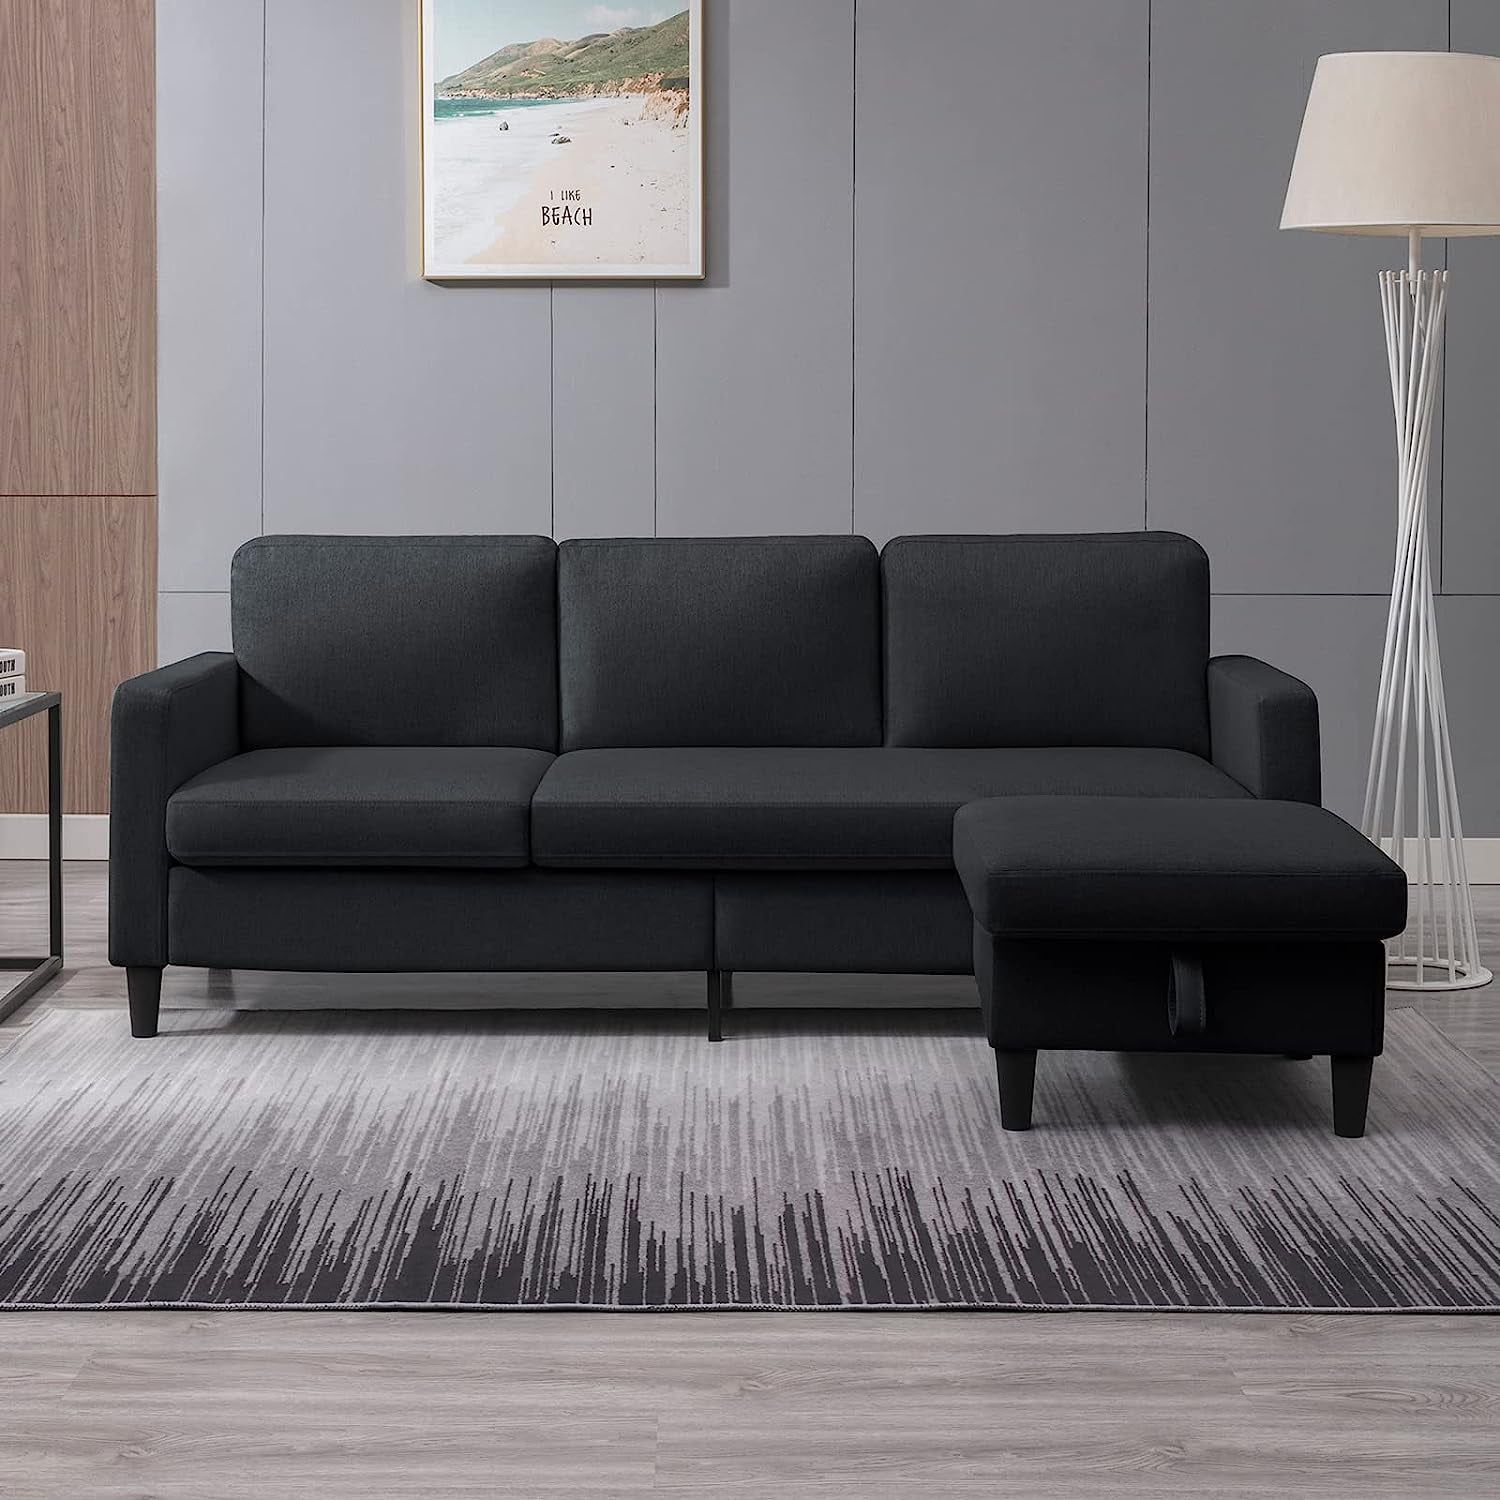 Mjkone 76" W Convertible Sectional Sofa Couch With Storage Ottoman,  L Shaped Couch, 3 Seat Sofas With Reversible Chaise, Sectional Couches For  Living Room/office/bedroom (dark Grey) – Walmart With Regard To 3 Seat Sofa Sectionals With Reversible Chaise (View 6 of 20)